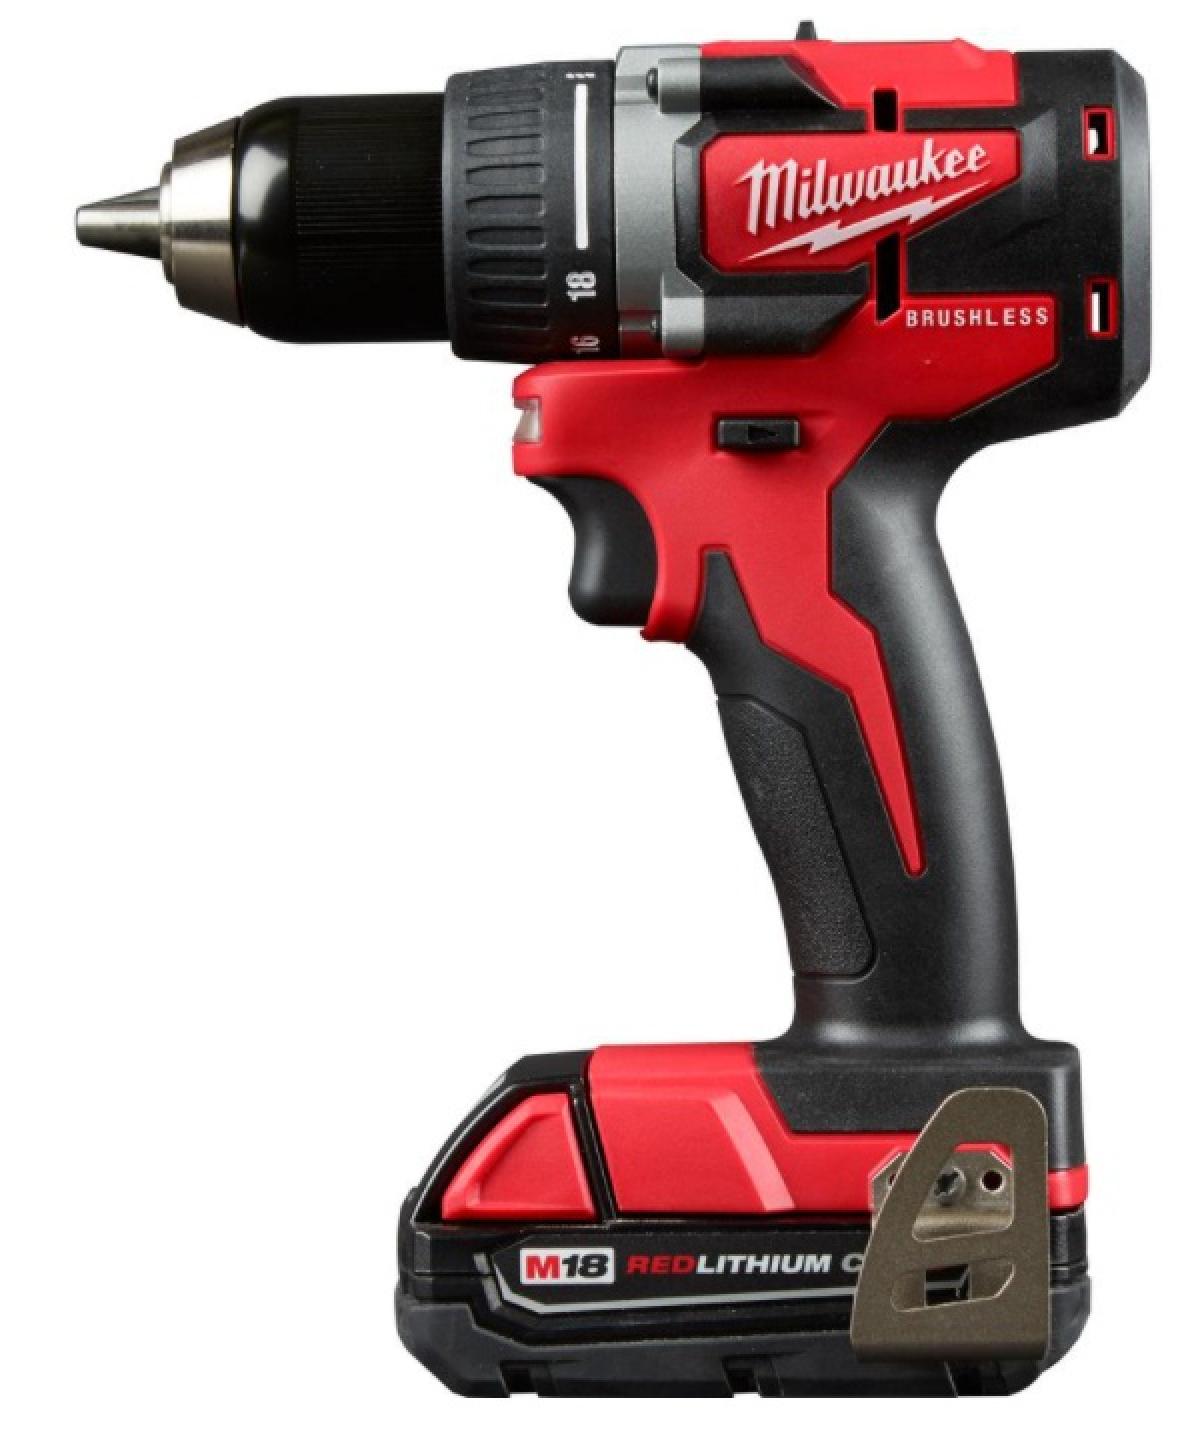 Milwaukee M18 Compact Brushless 1/2" Drill/Driver Kit Left Side